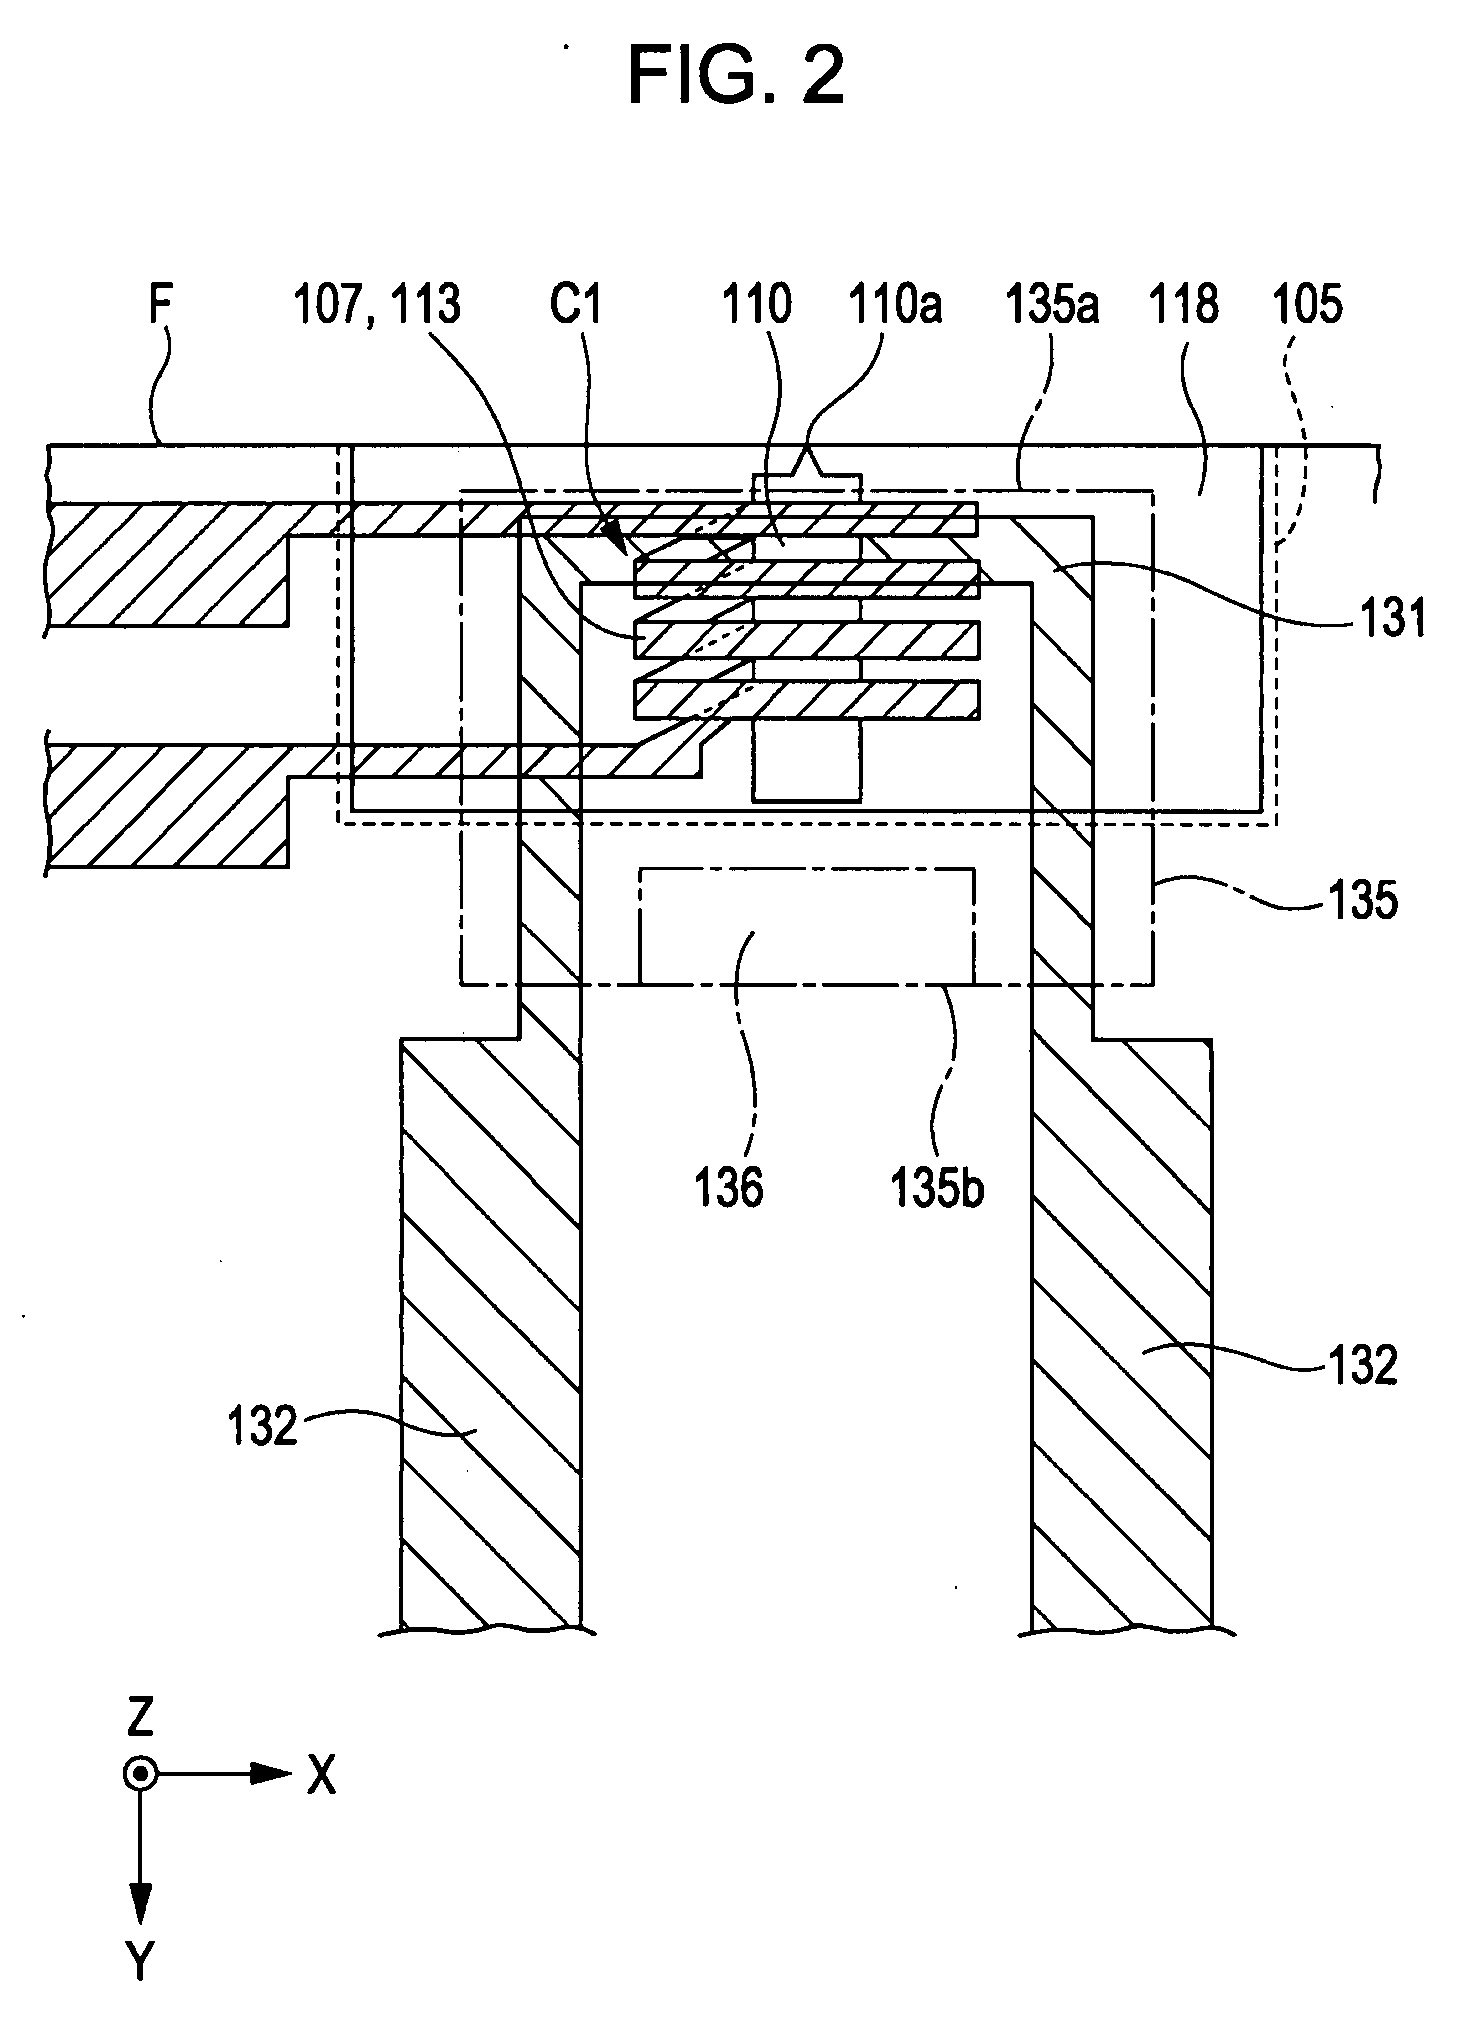 Perpendicular magnetic recording head including heating element